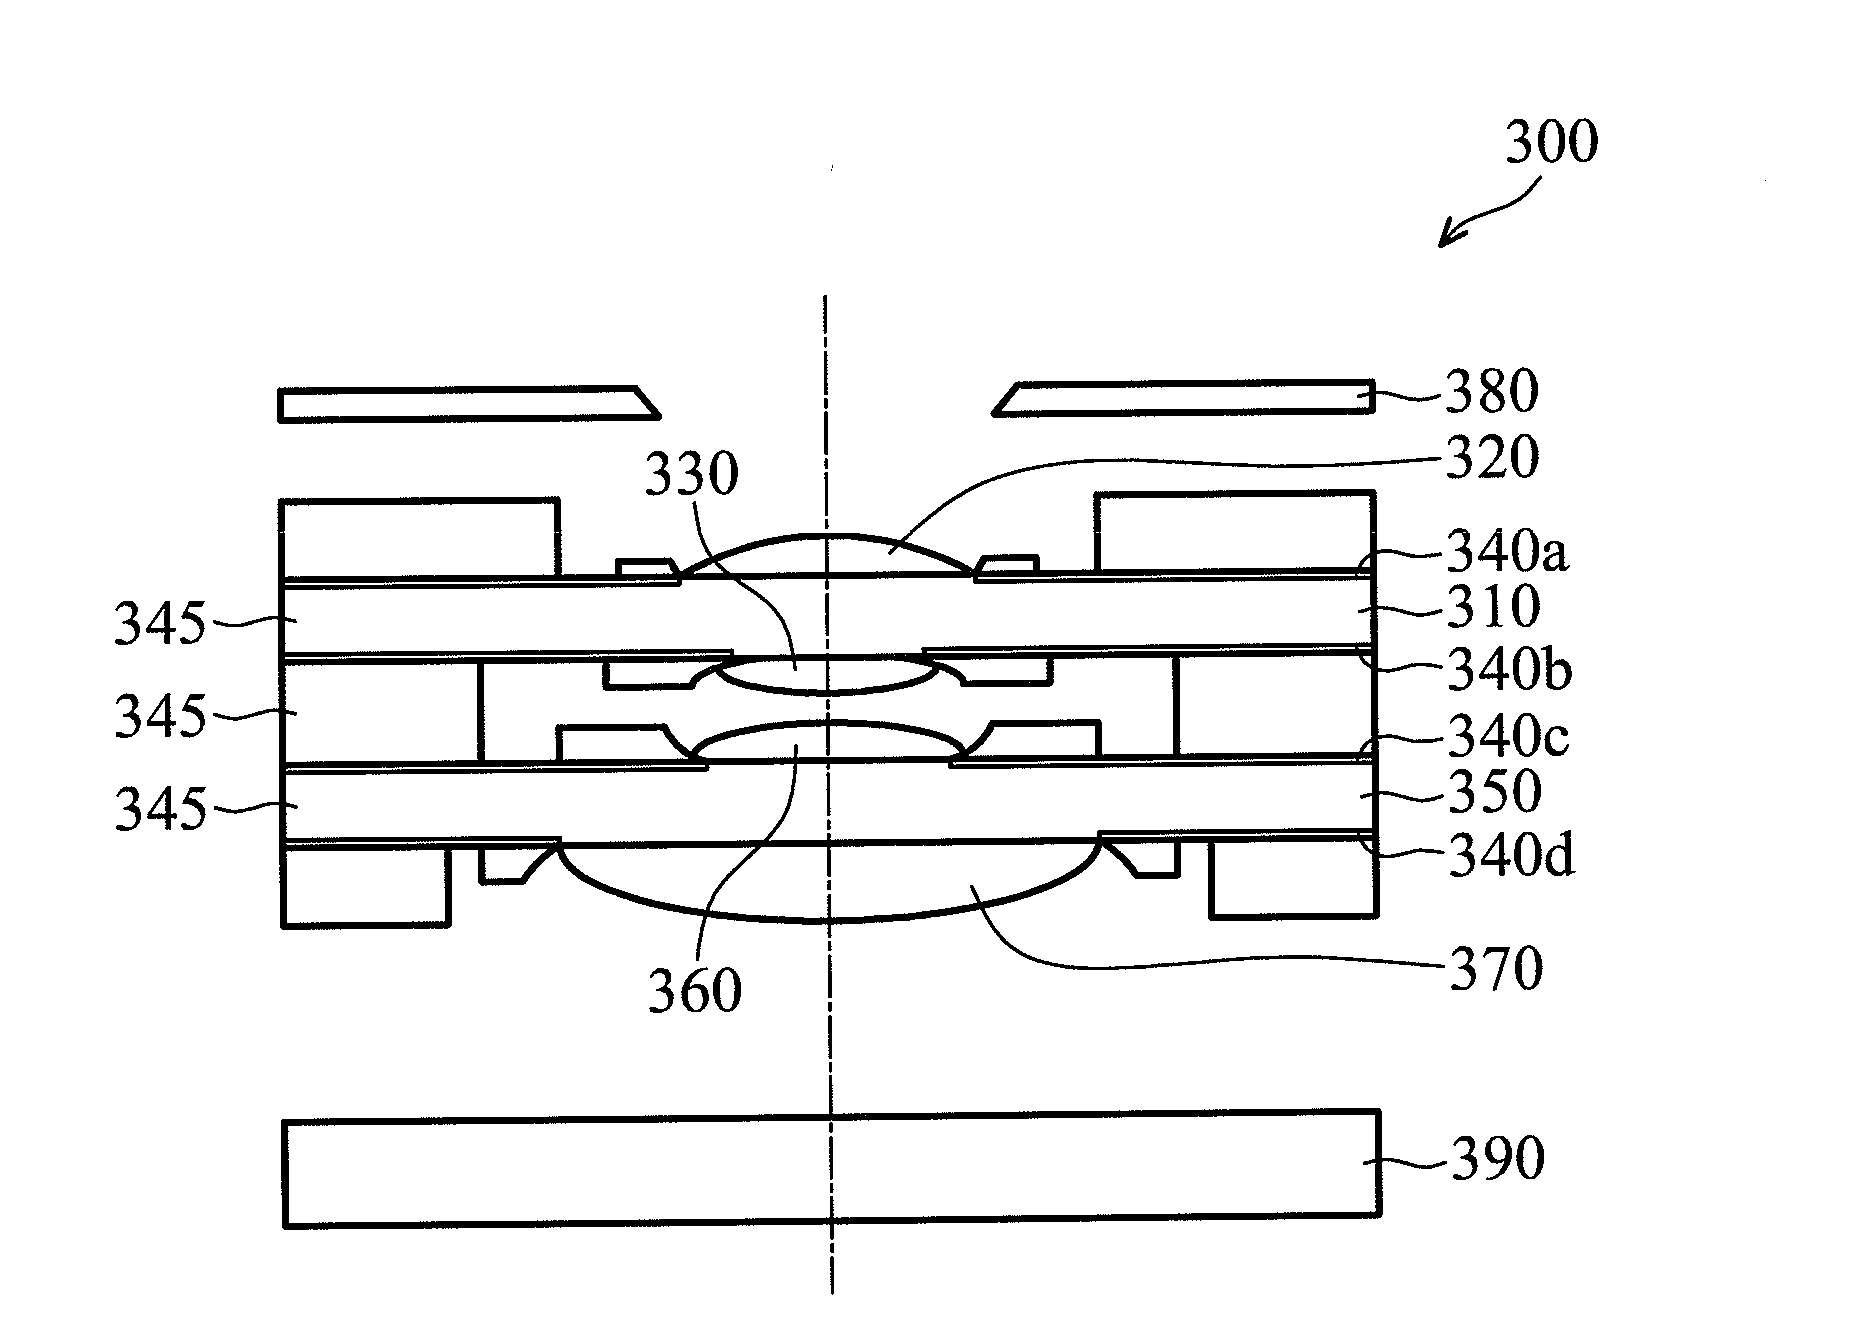 Image capture lens module and wafer level packaged image capture devices